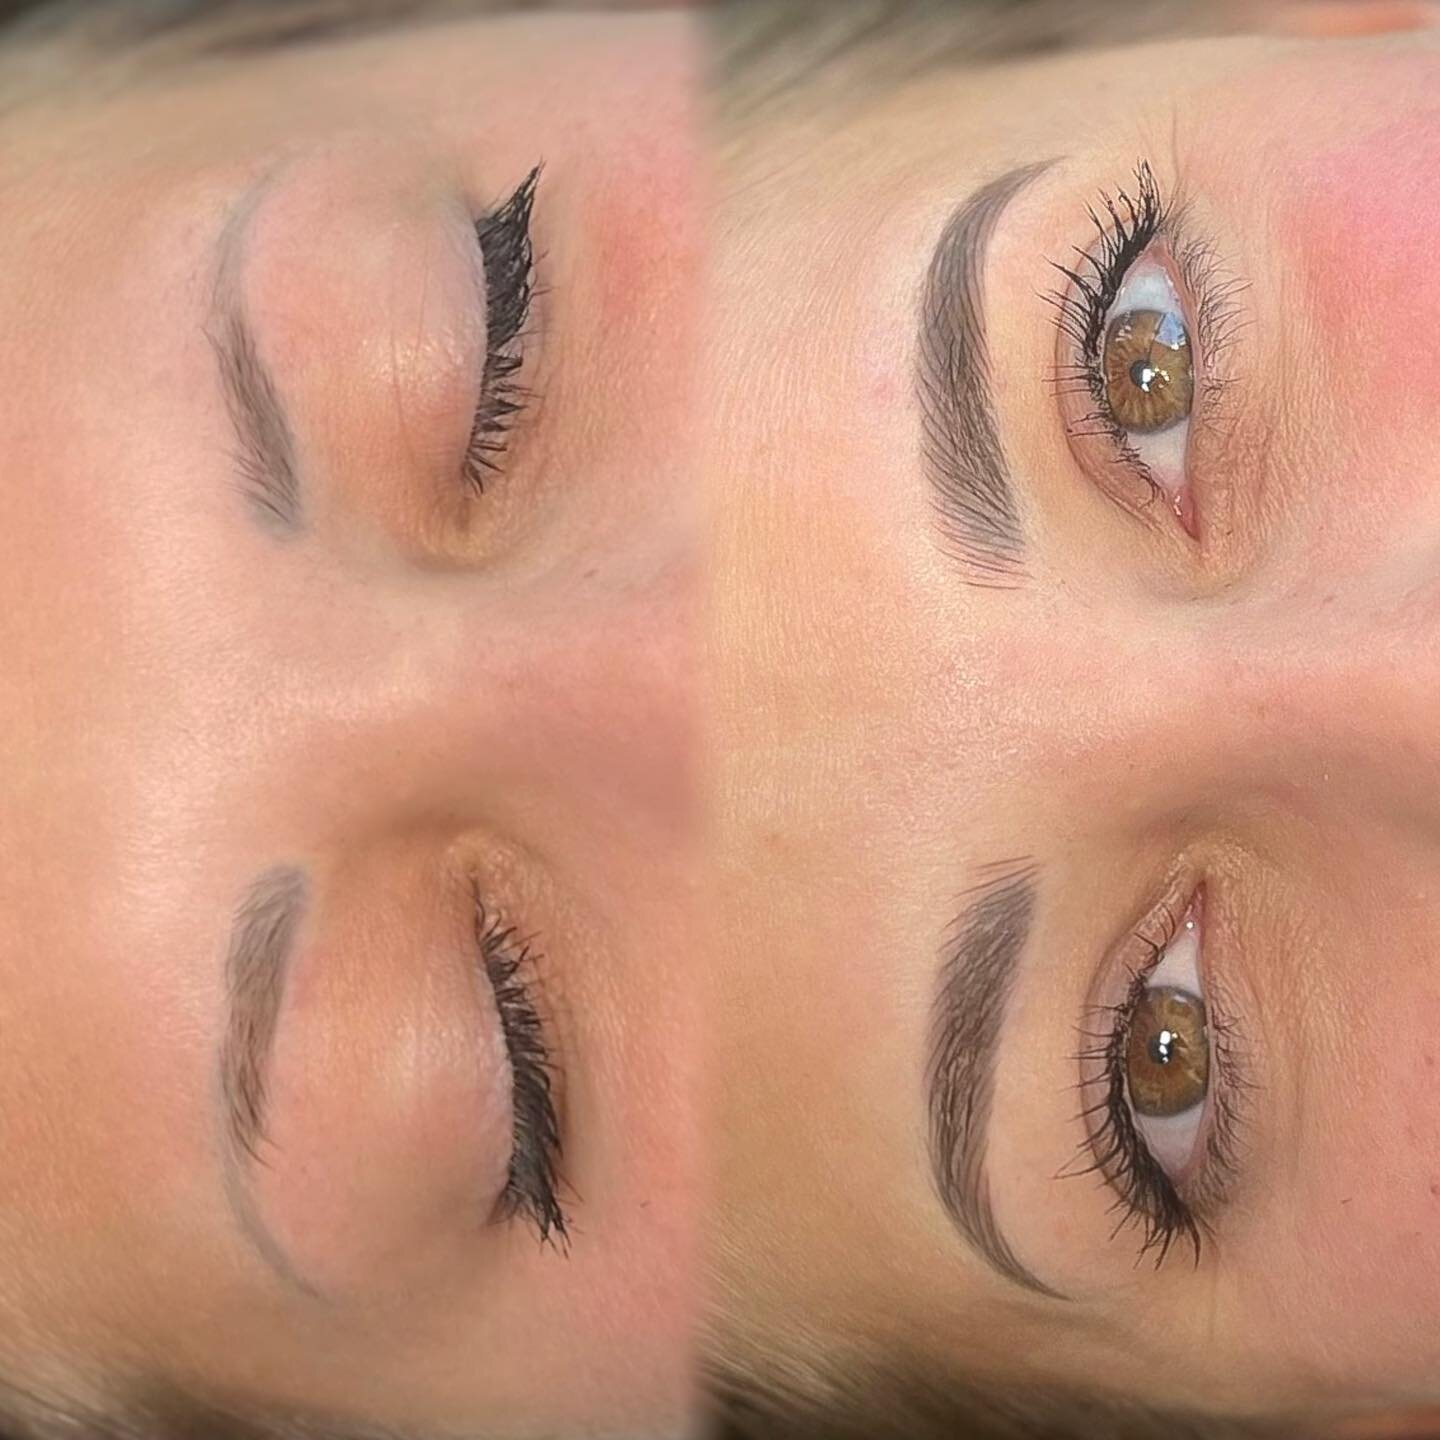 First session ⚠️cover up⚠️ of old microblading (not done by me)

We went a bit thicker and fluffier to give her the shape she wanted. I am so happy with how these look so far! 

I get A LOT of cover up requests. I recommend sending me a photo of your